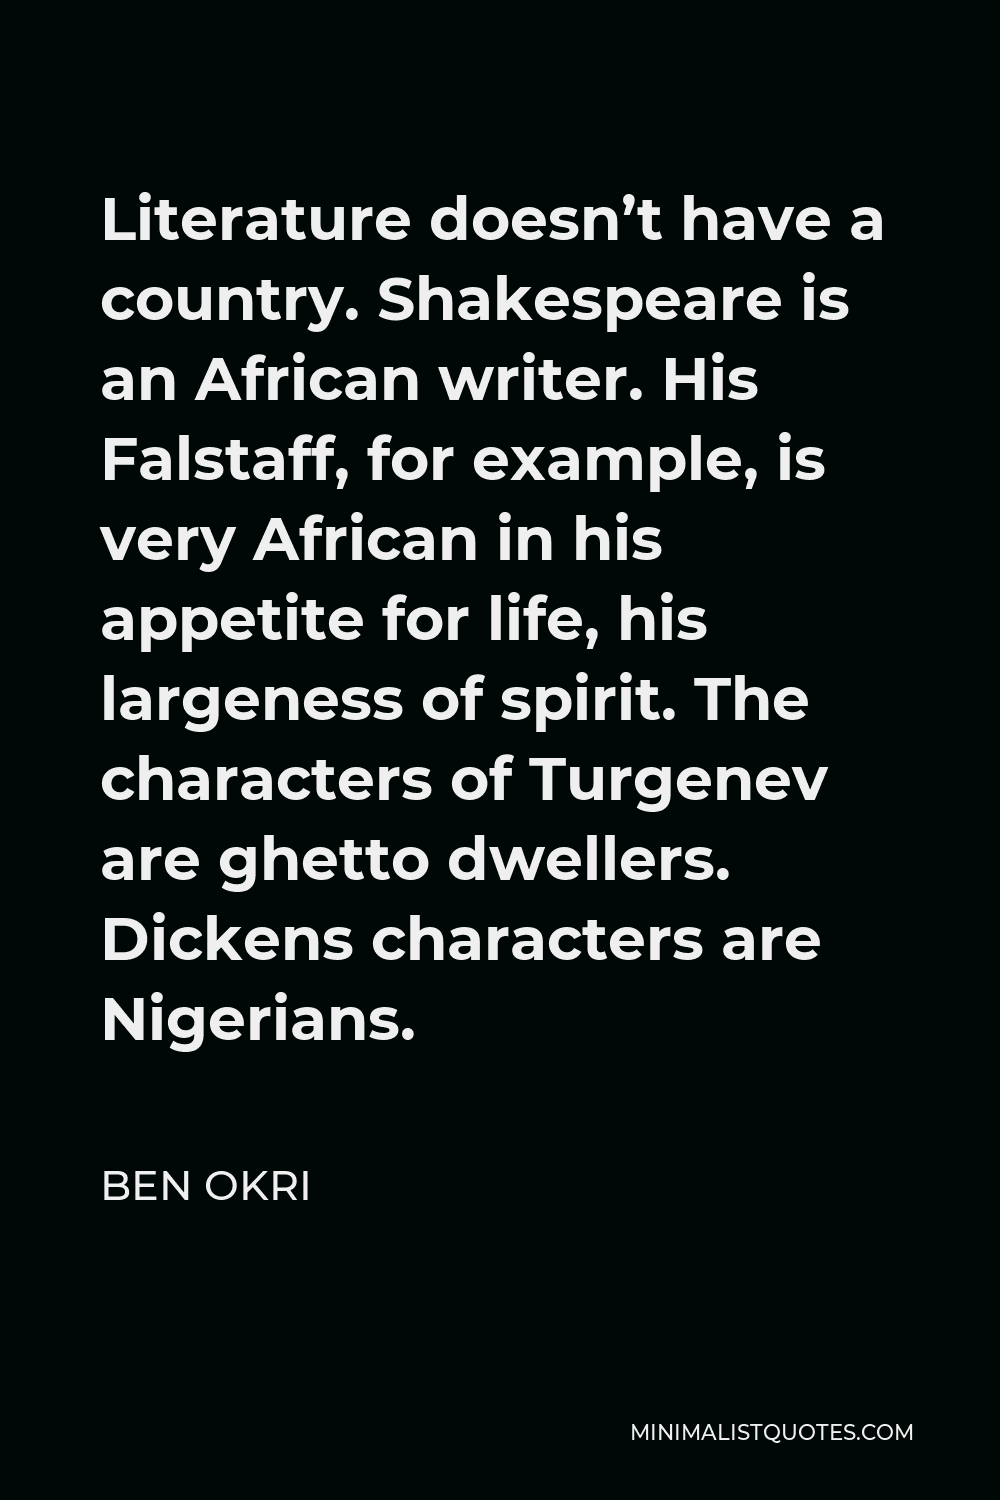 Ben Okri Quote - Literature doesn’t have a country. Shakespeare is an African writer. His Falstaff, for example, is very African in his appetite for life, his largeness of spirit. The characters of Turgenev are ghetto dwellers. Dickens characters are Nigerians.